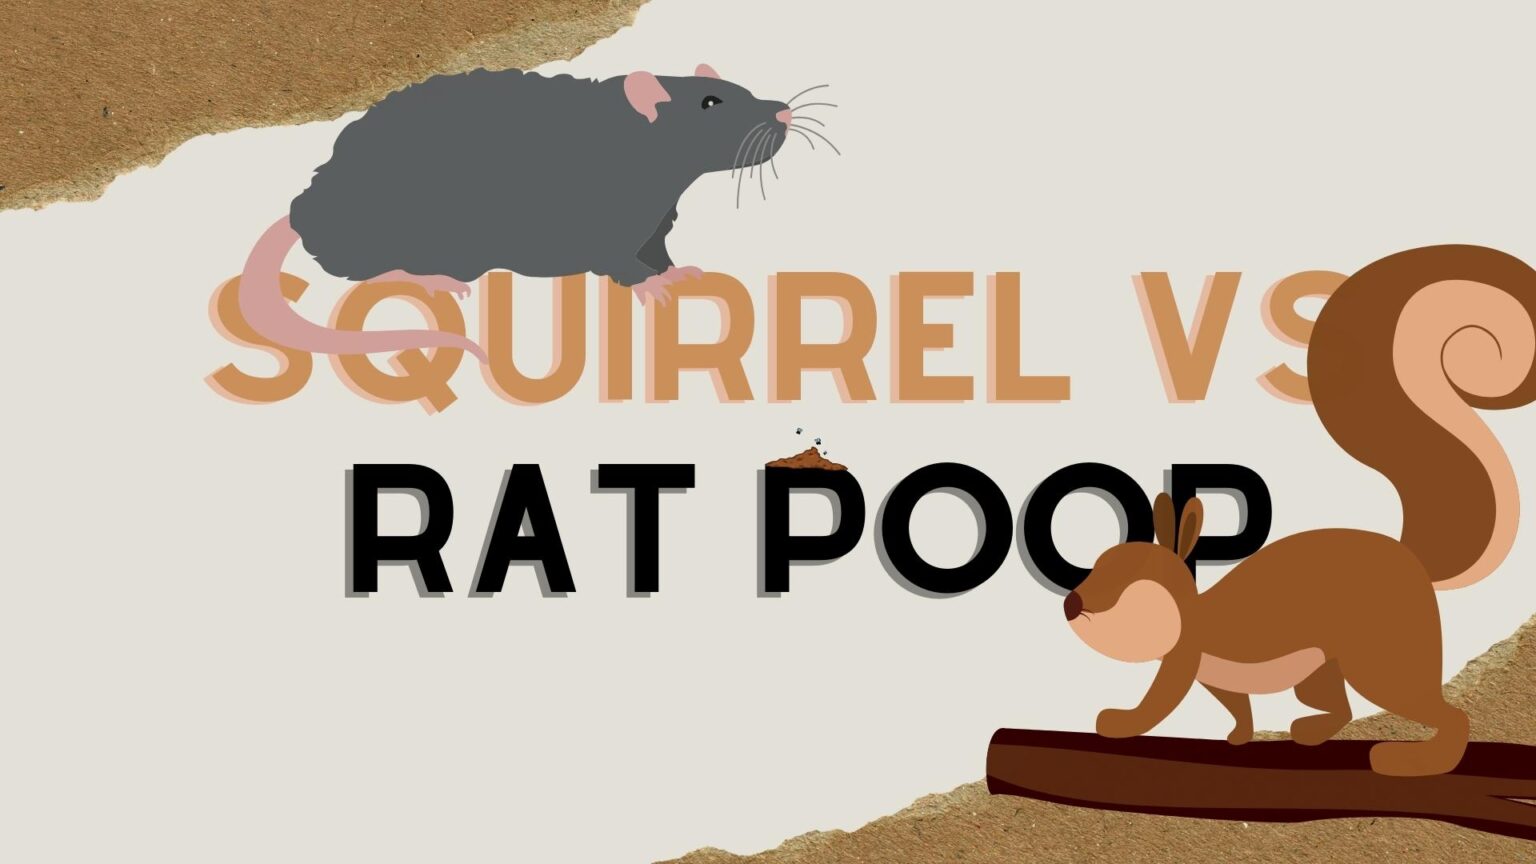 Squirrel Vs Rat Poop How To Tell The Difference 1 1536x864 